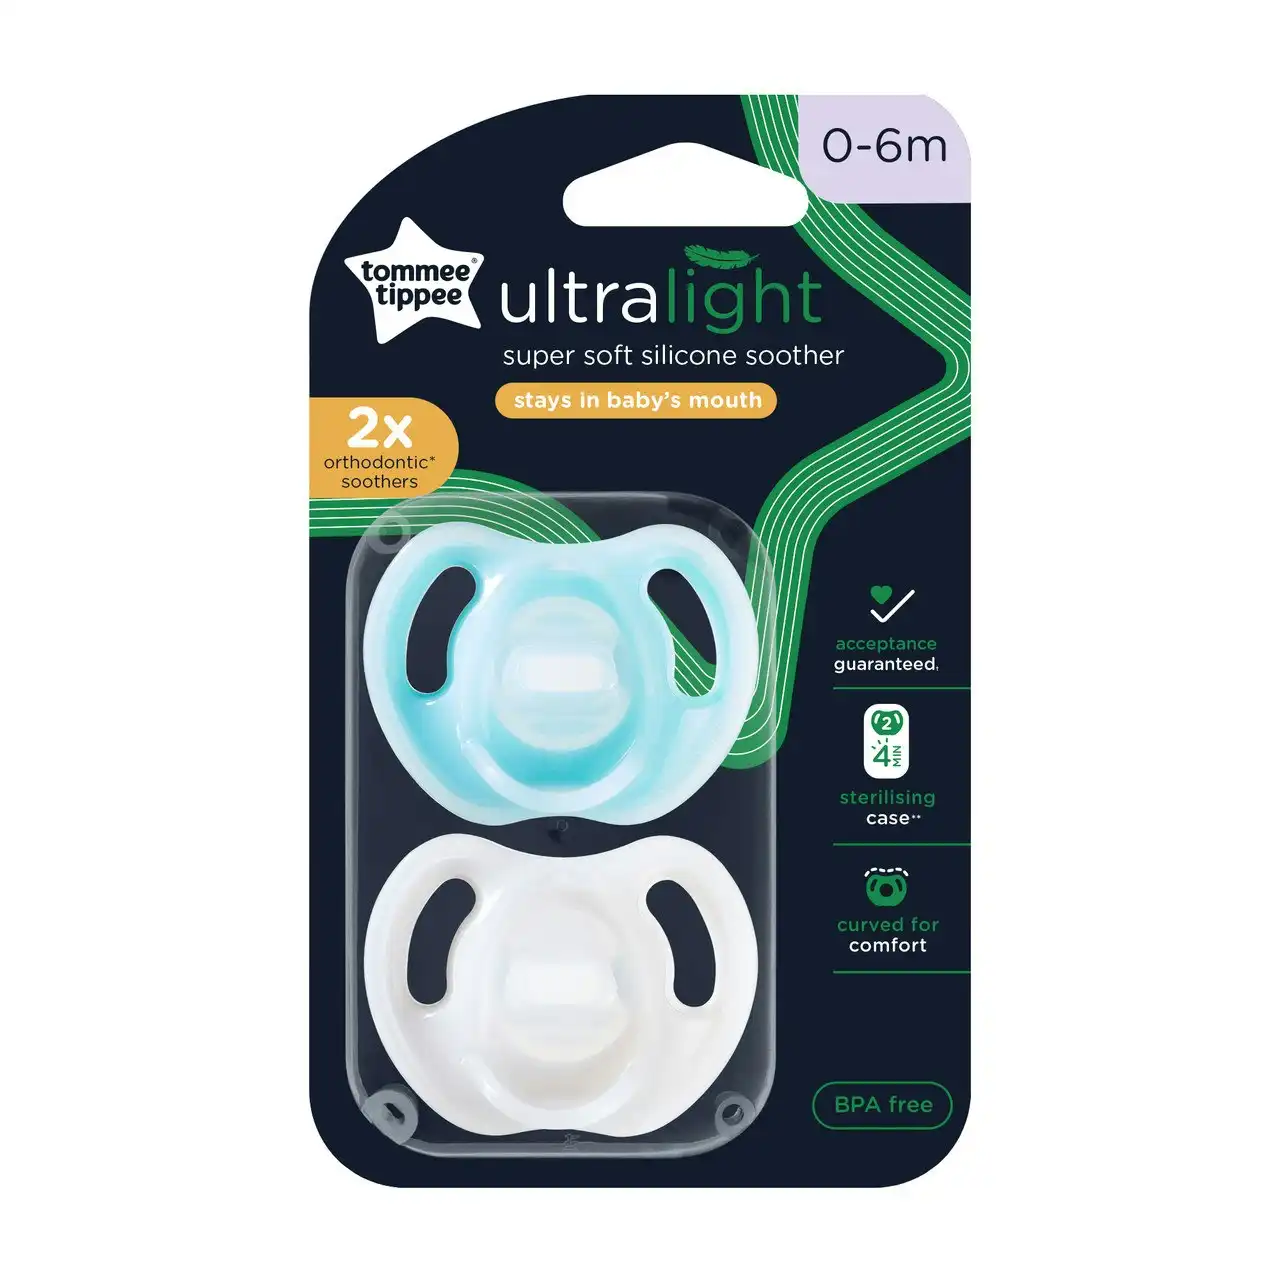 Tommee Tippee Ultra-light Soothers, 0-6 months, 2 pack of one piece silicone, BPA free soothers